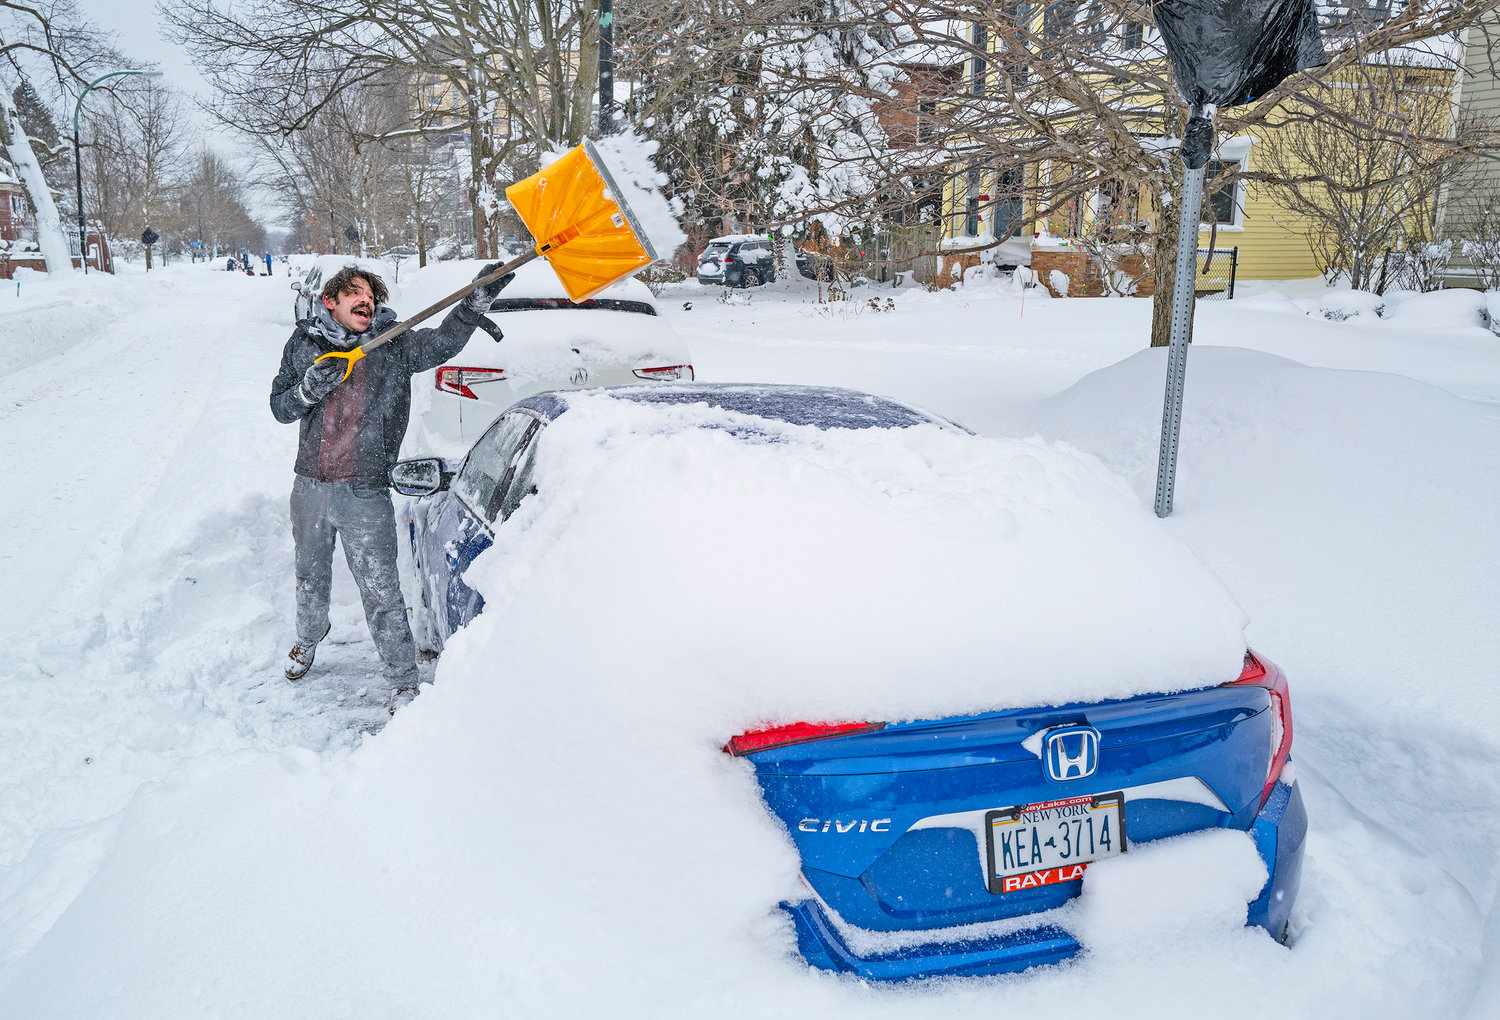 Christian Parker shovels out his car in the Elmwood Village neighborhood of Buffalo. Monday, Dec. 26, after a massive snow storm blanketed the city.